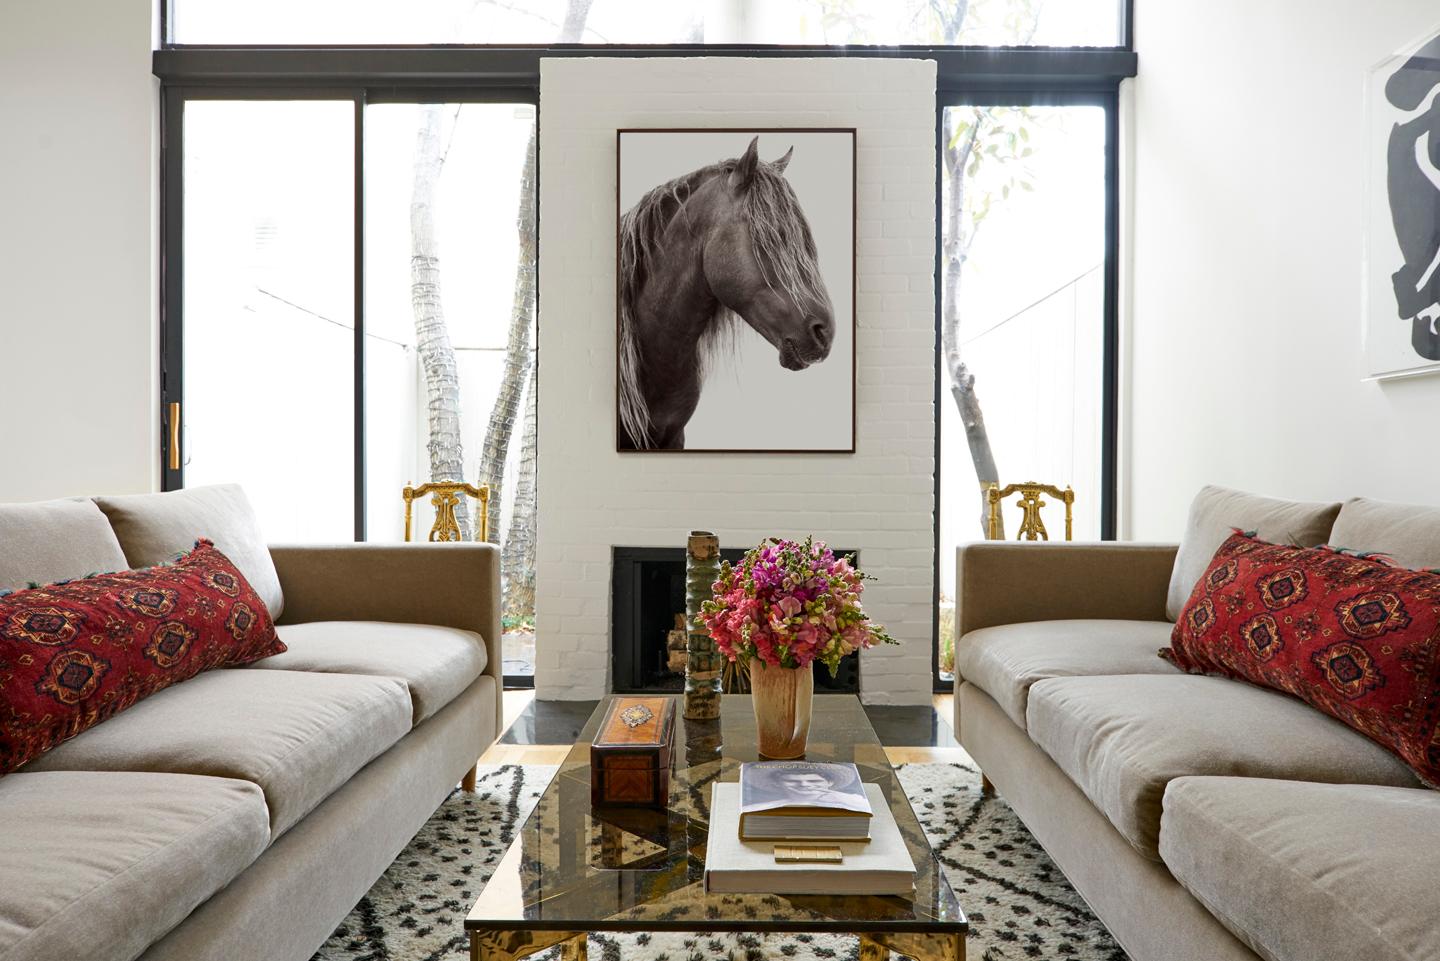 Intimate Portrait of a Sable Island Horse's Beautiful Mane, Fashion, Iconic - Contemporary Photograph by Drew Doggett